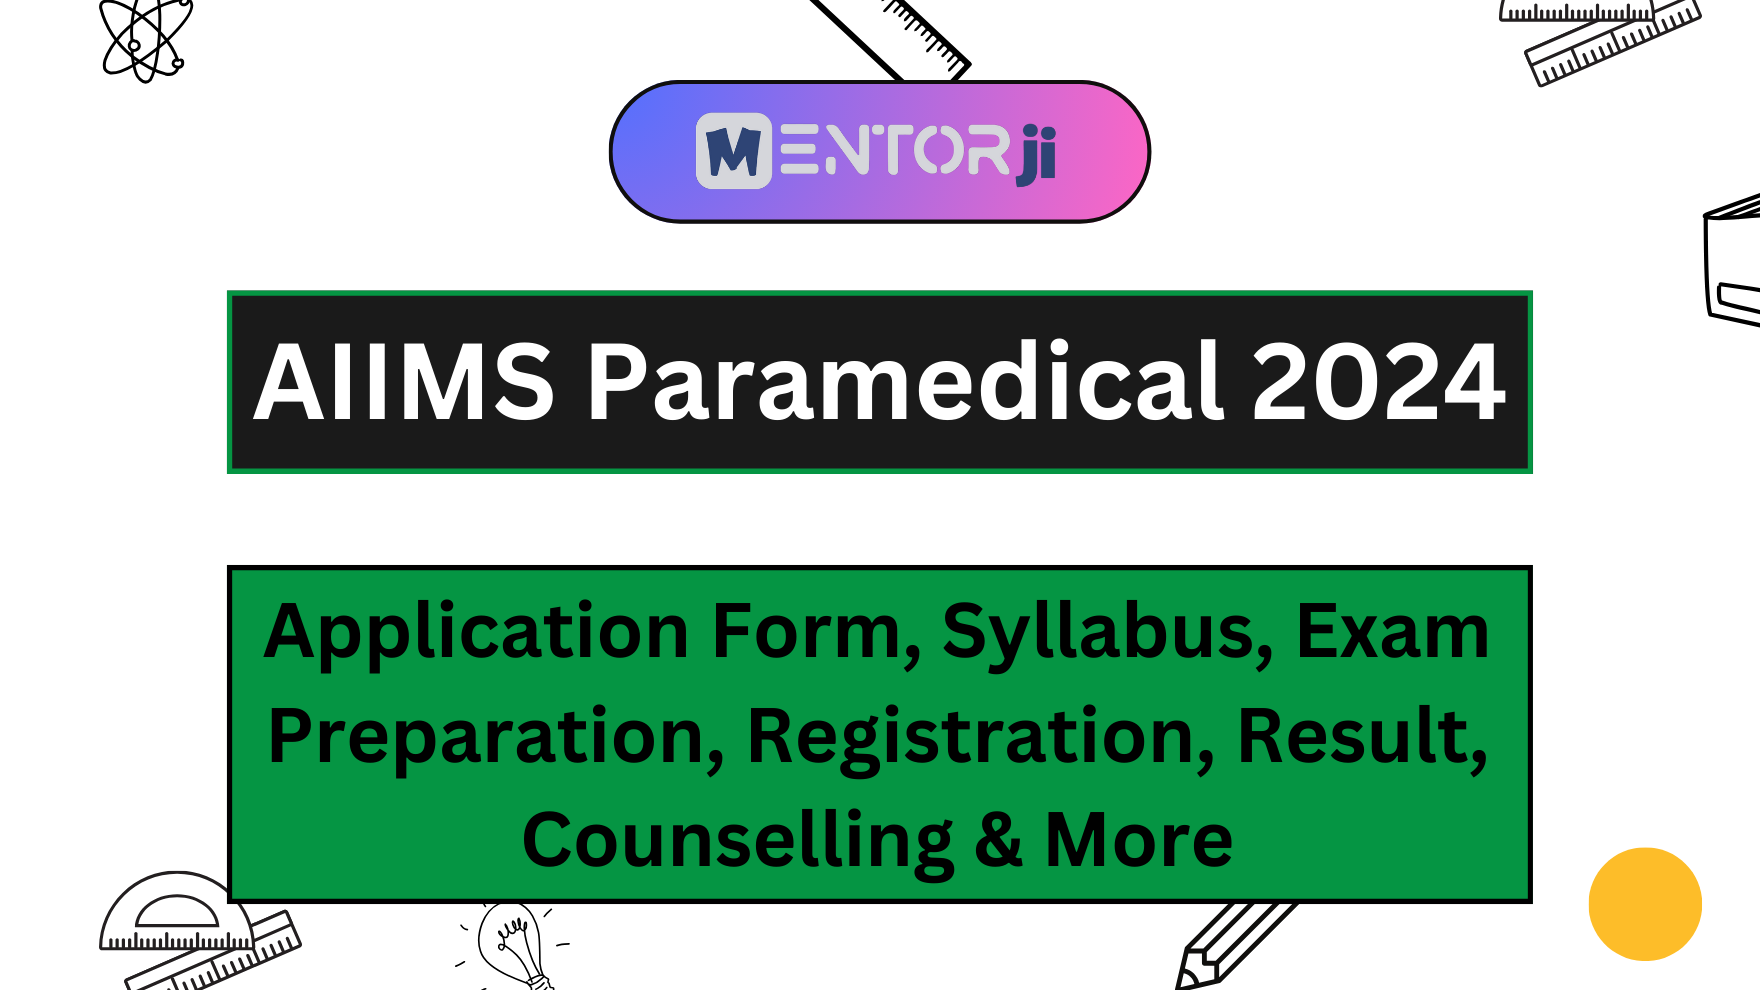 AIIMS Paramedical 2024: Application Form, Syllabus, Exam Preparation, Registration, Result, Counselling